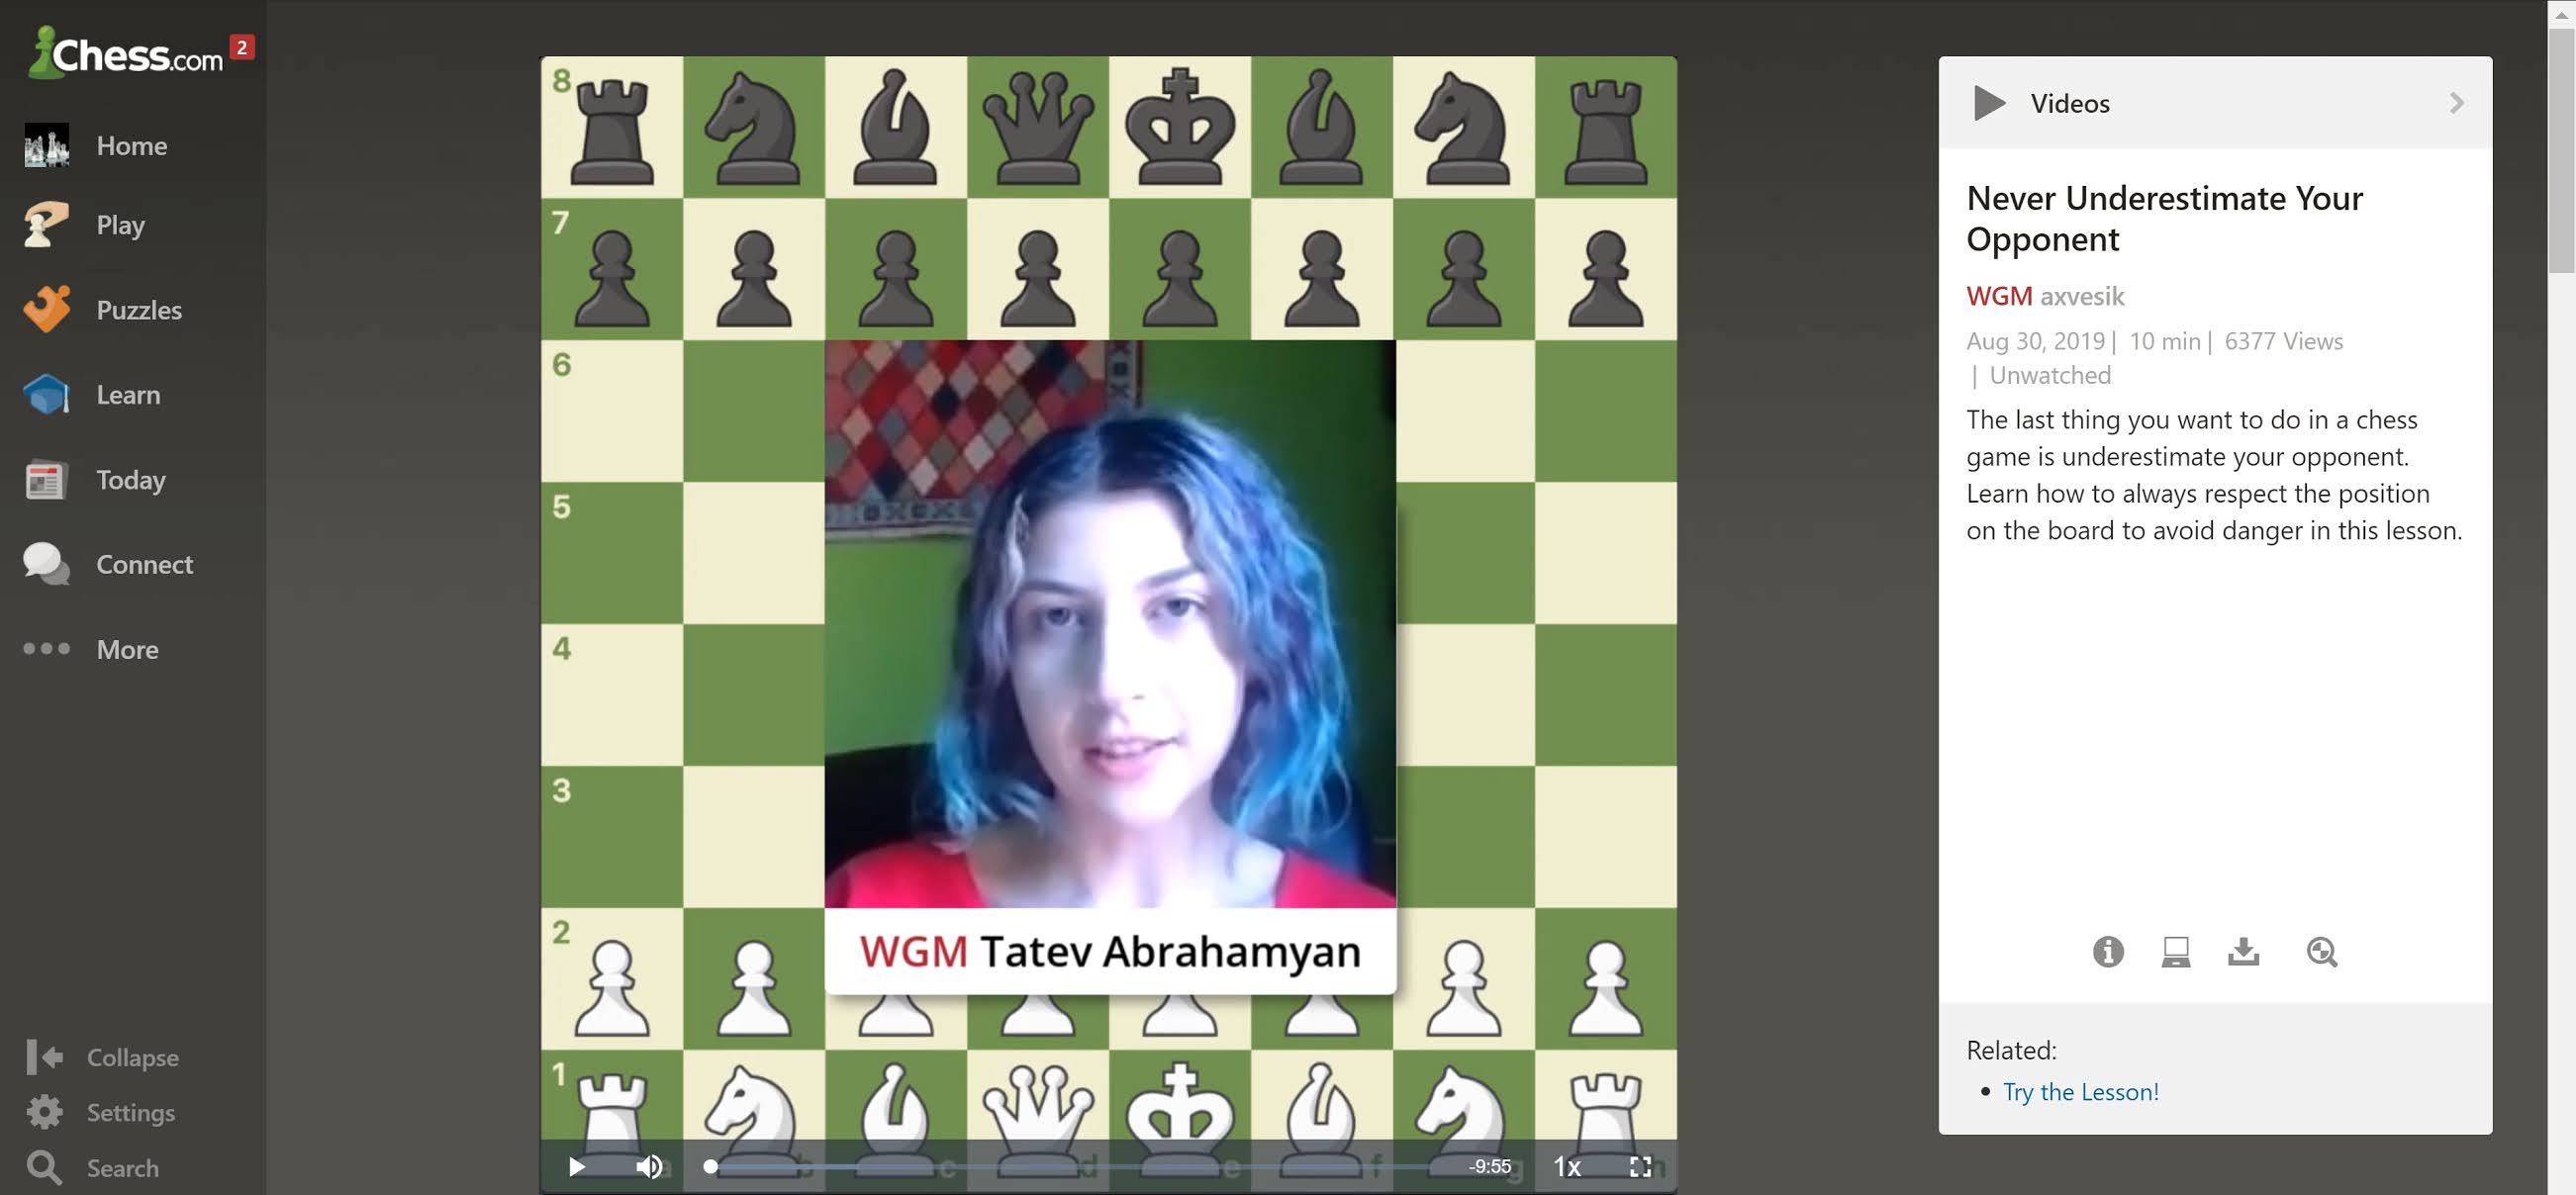 Path to Chess Mastery: Video completed - Studies in: The Caro-Kann Defense 2